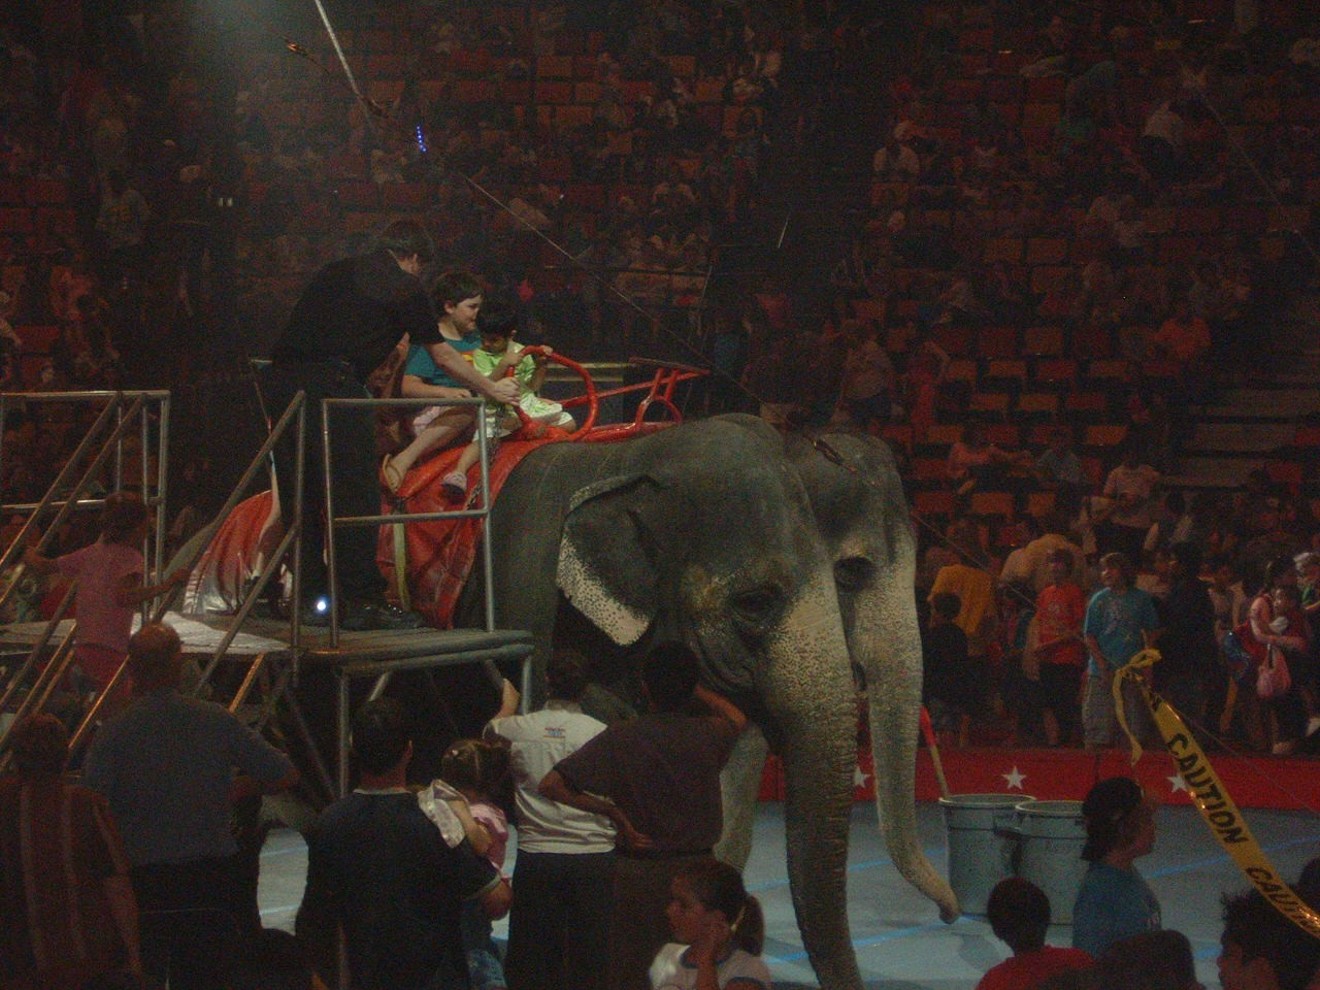 Garden Bros. Circus will stage performances at the Miami-Dade County Fairgrounds before heading to Pembroke Pines.